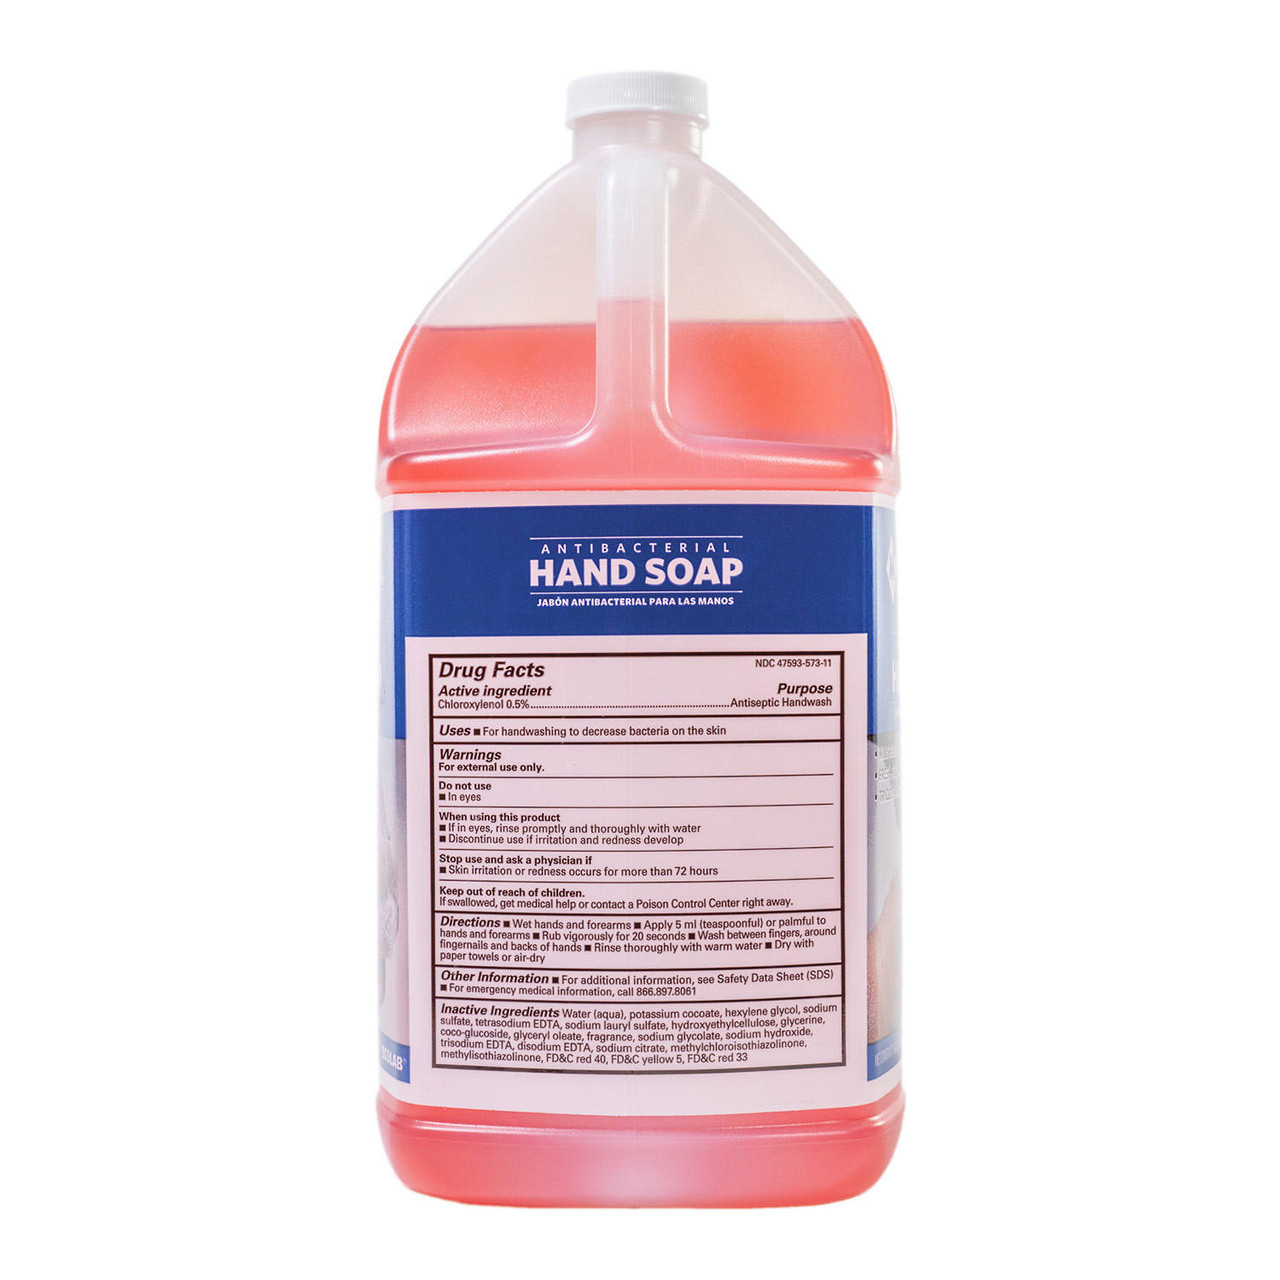 Member's Mark Commercial Antibacterial Hand Soap, 1 Gallon - [From 45.00 - Choose pk Qty ] - *Ships from Miami